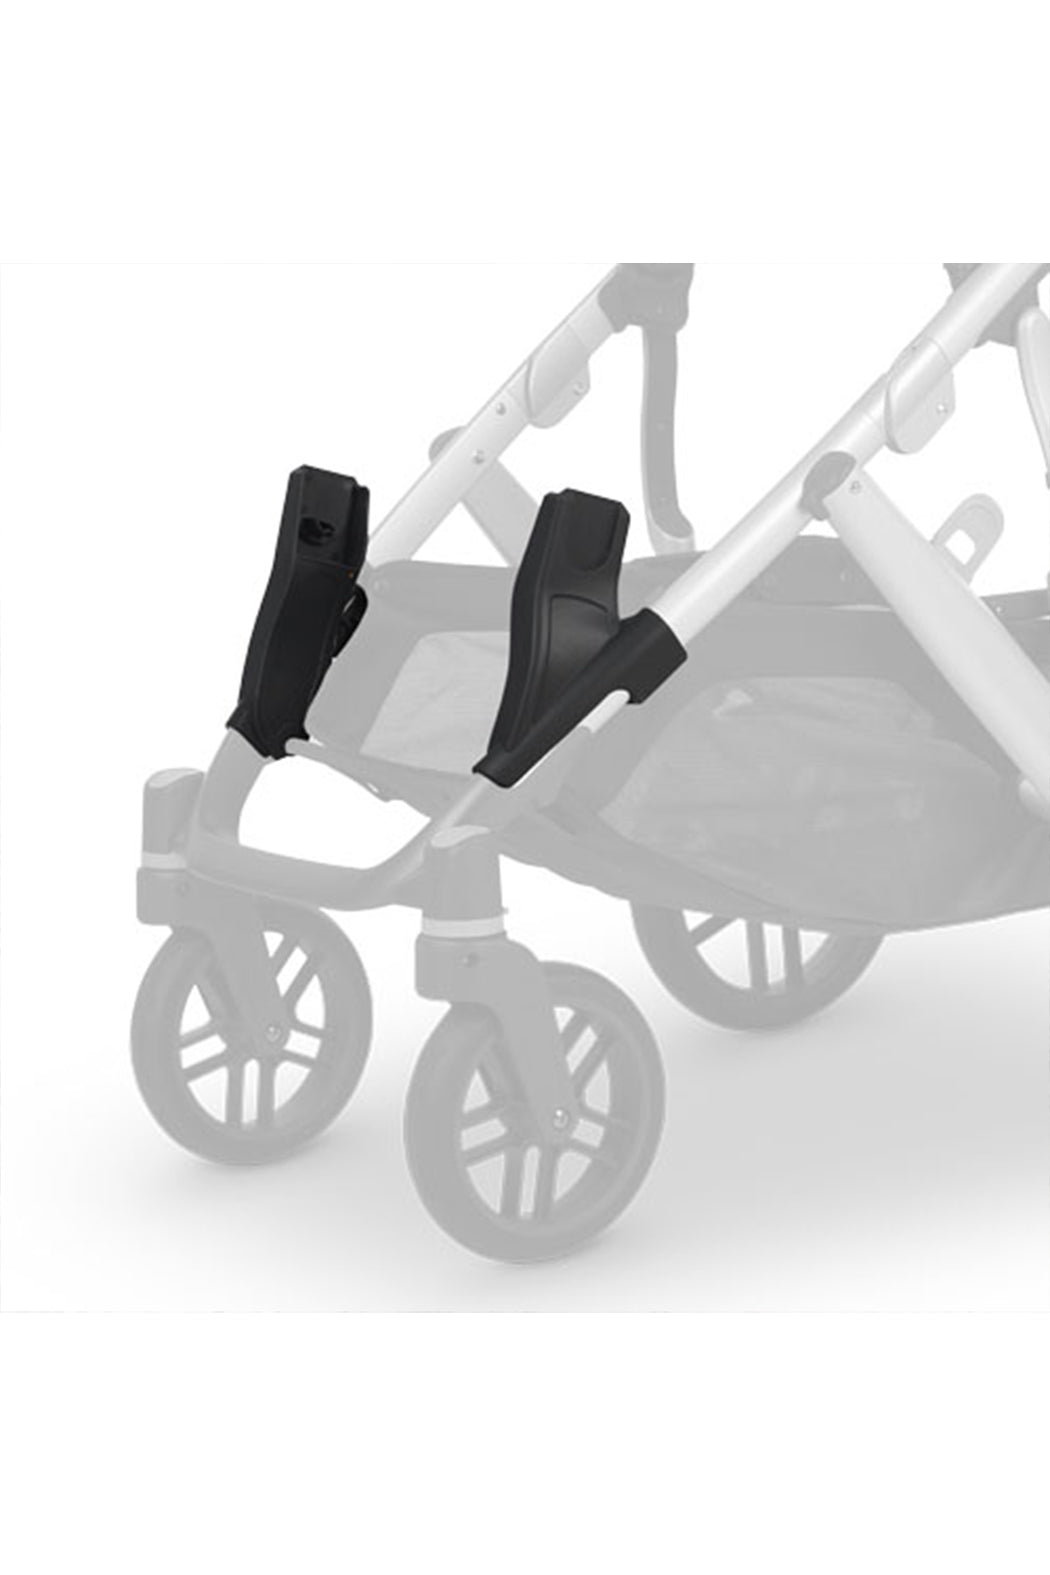 UPPAbaby Lower Car Seat Adapters for Vista and Vista V2 (Maxi-Cosi®, Nuna® and Cybex)